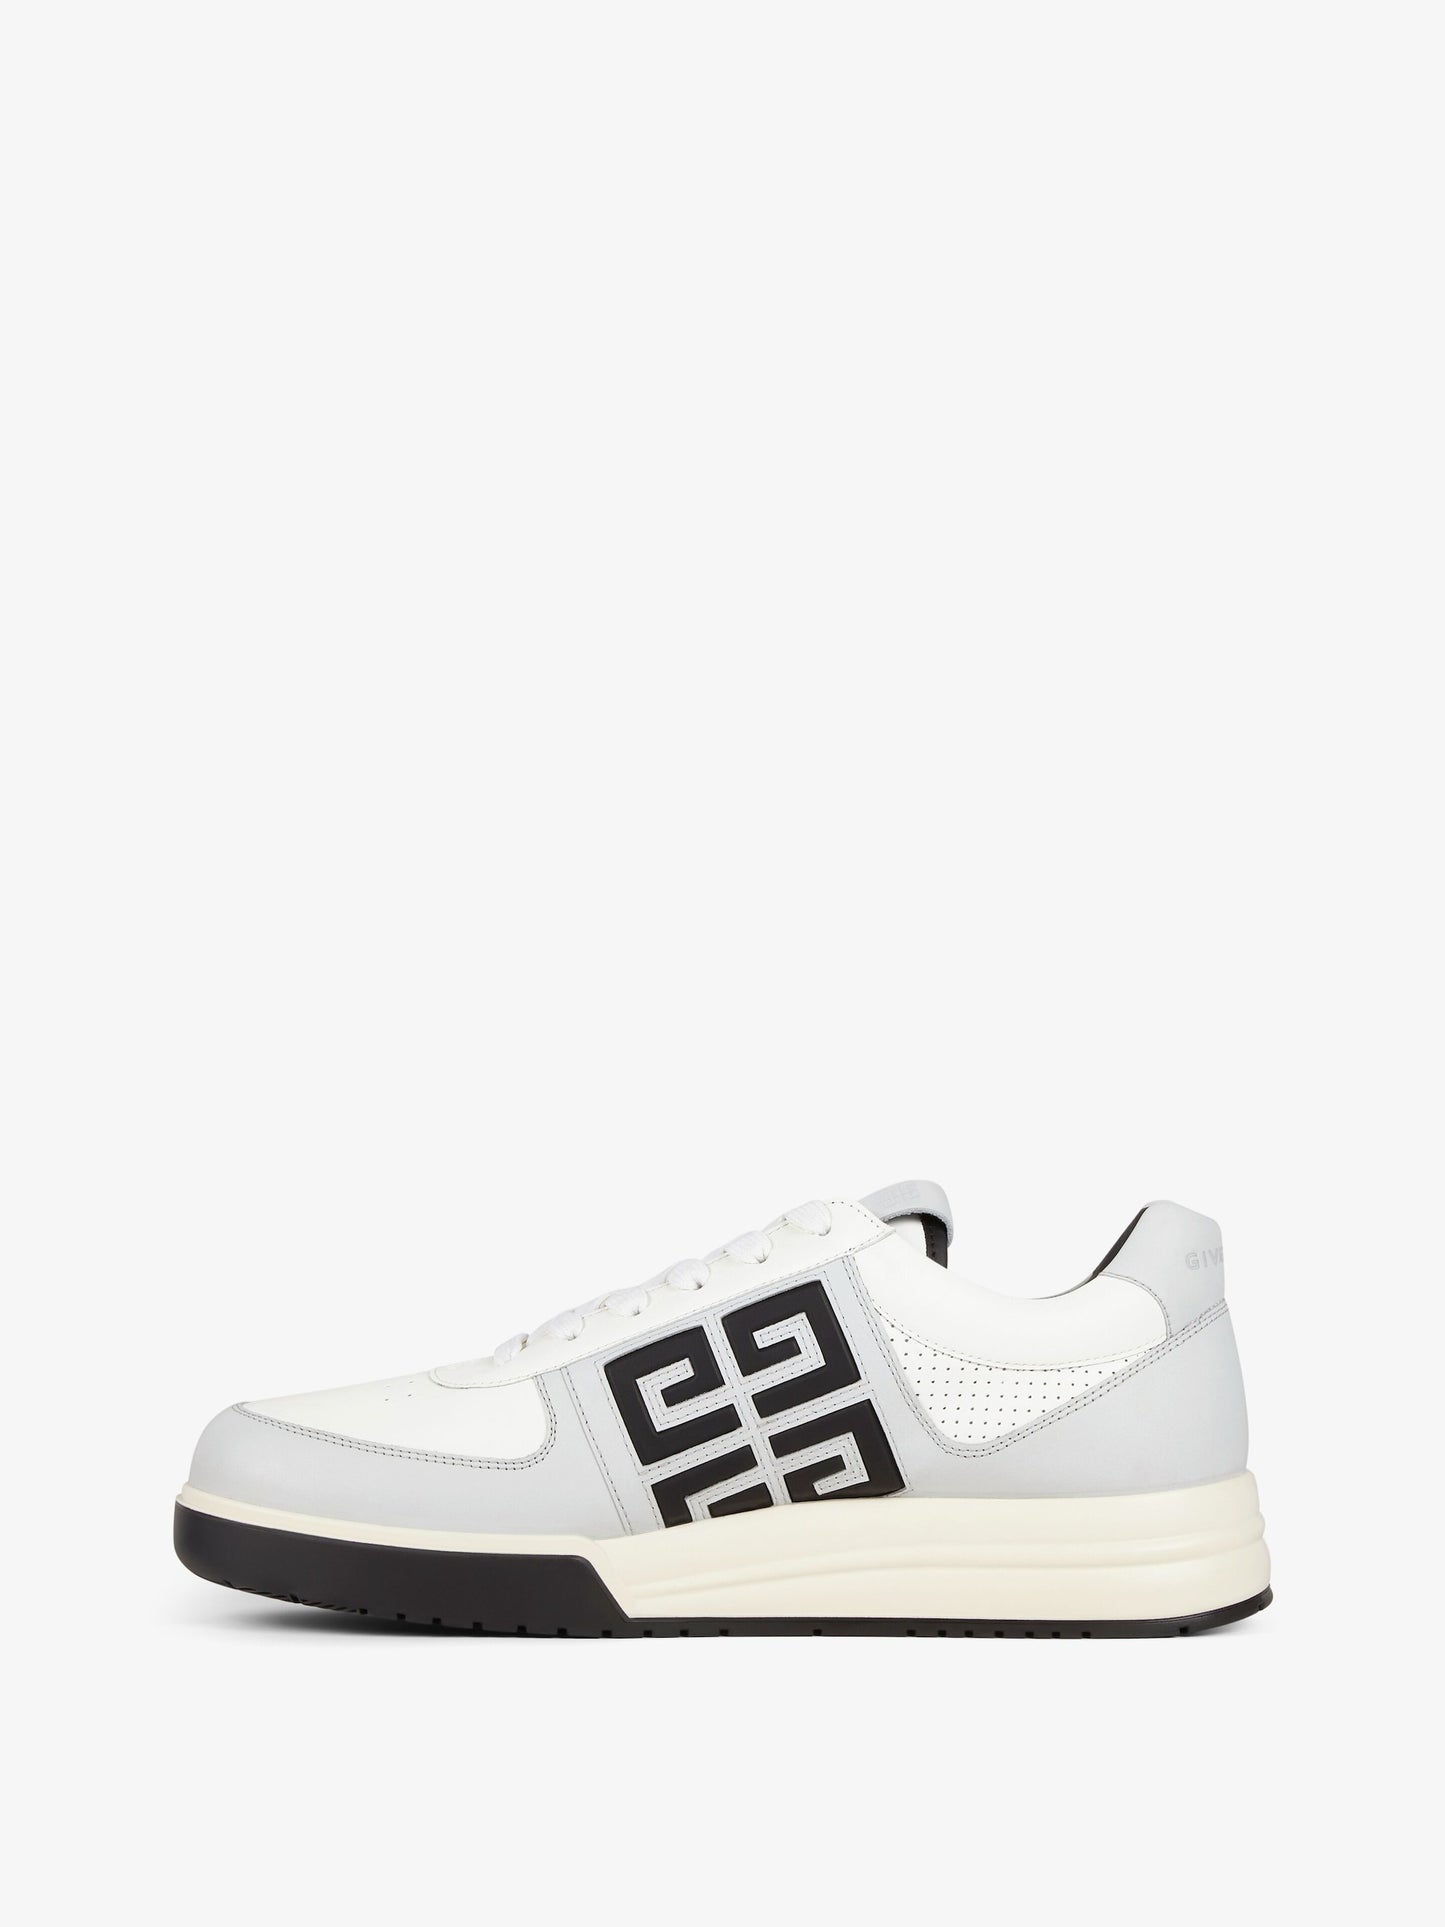 GIVENCHY G4 sneakers in leather and perforated leather